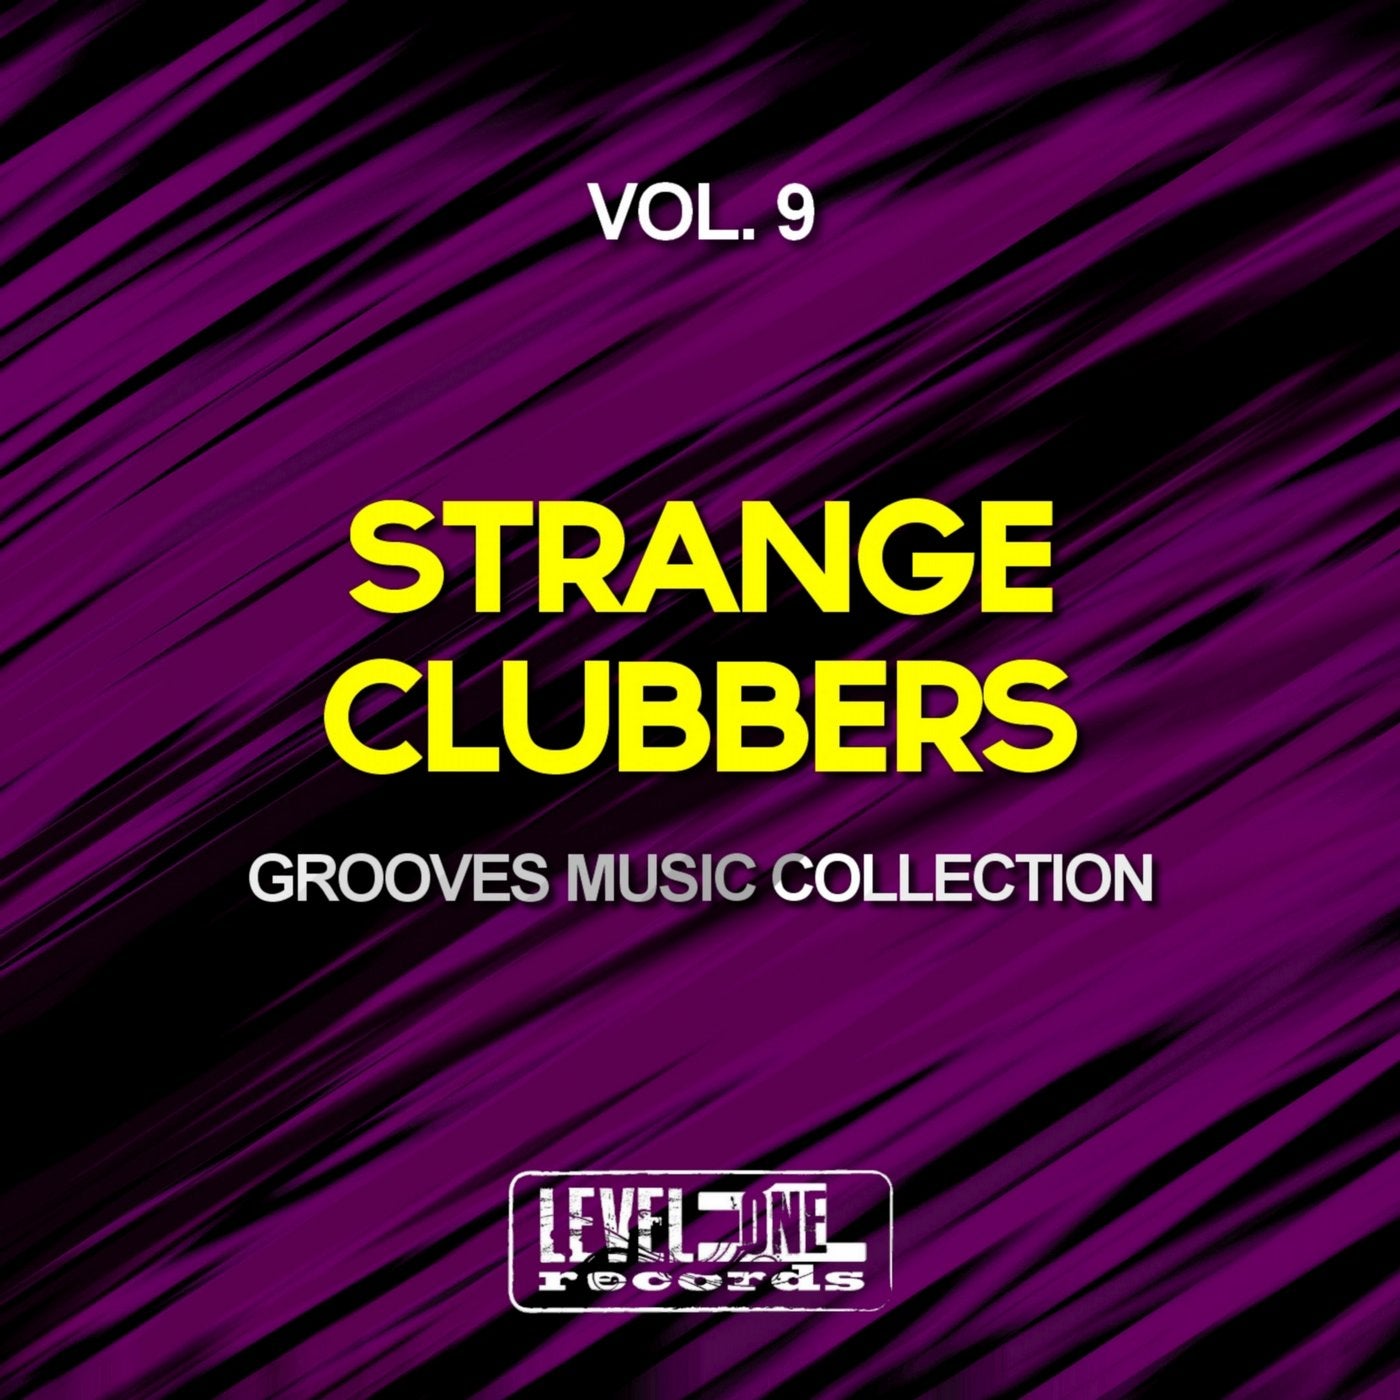 Strange Clubbers, Vol. 9 (Grooves Music Collection)